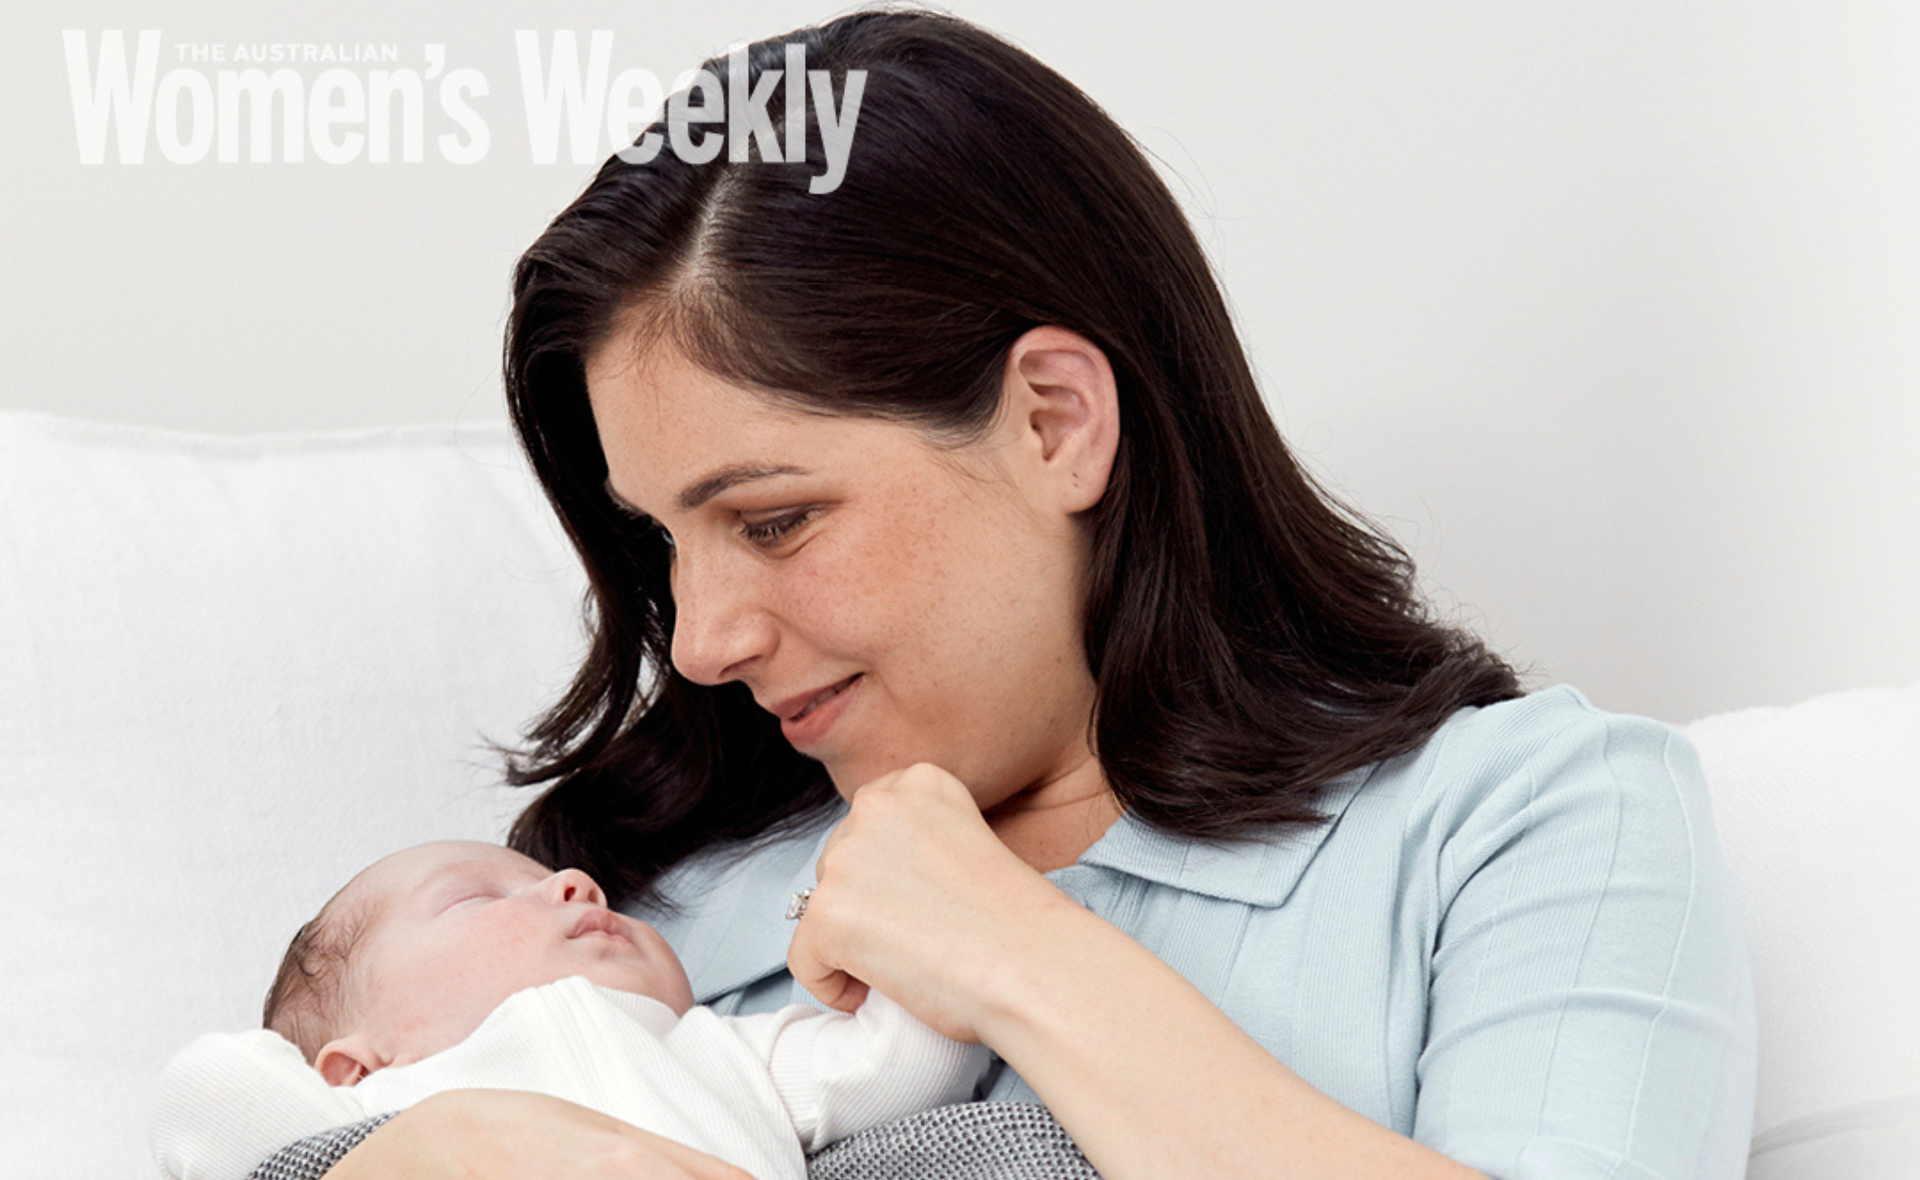 EXCLUSIVE: ABC journalist Nas Campanella introduces The Weekly to baby Lachlan and opens up about coping with other people’s prejudices